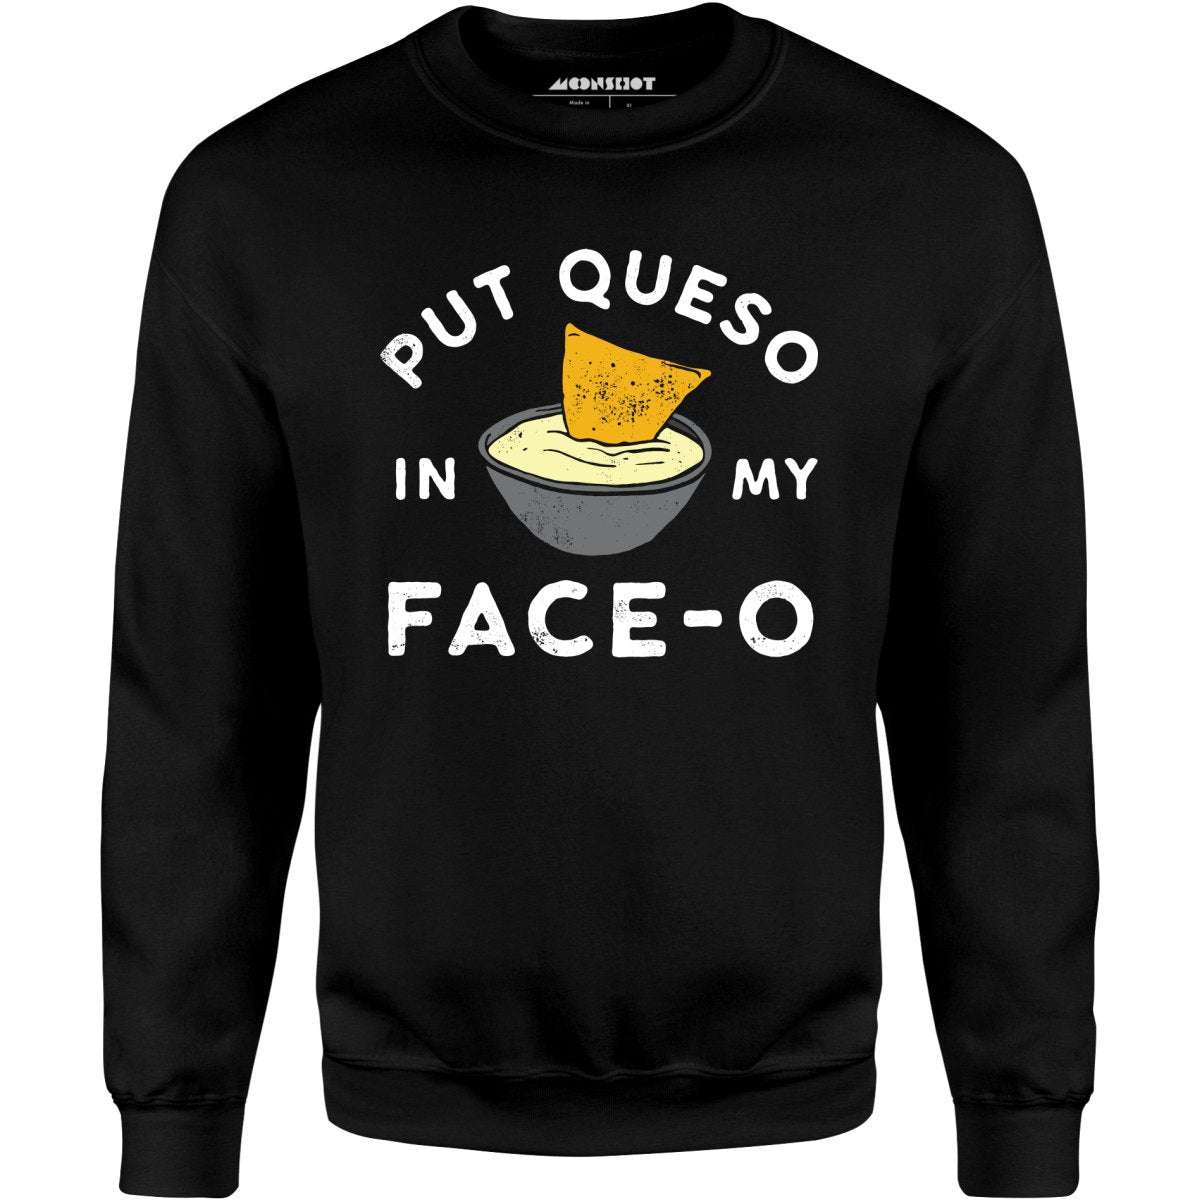 Put Queso in My Face-O - Unisex Sweatshirt